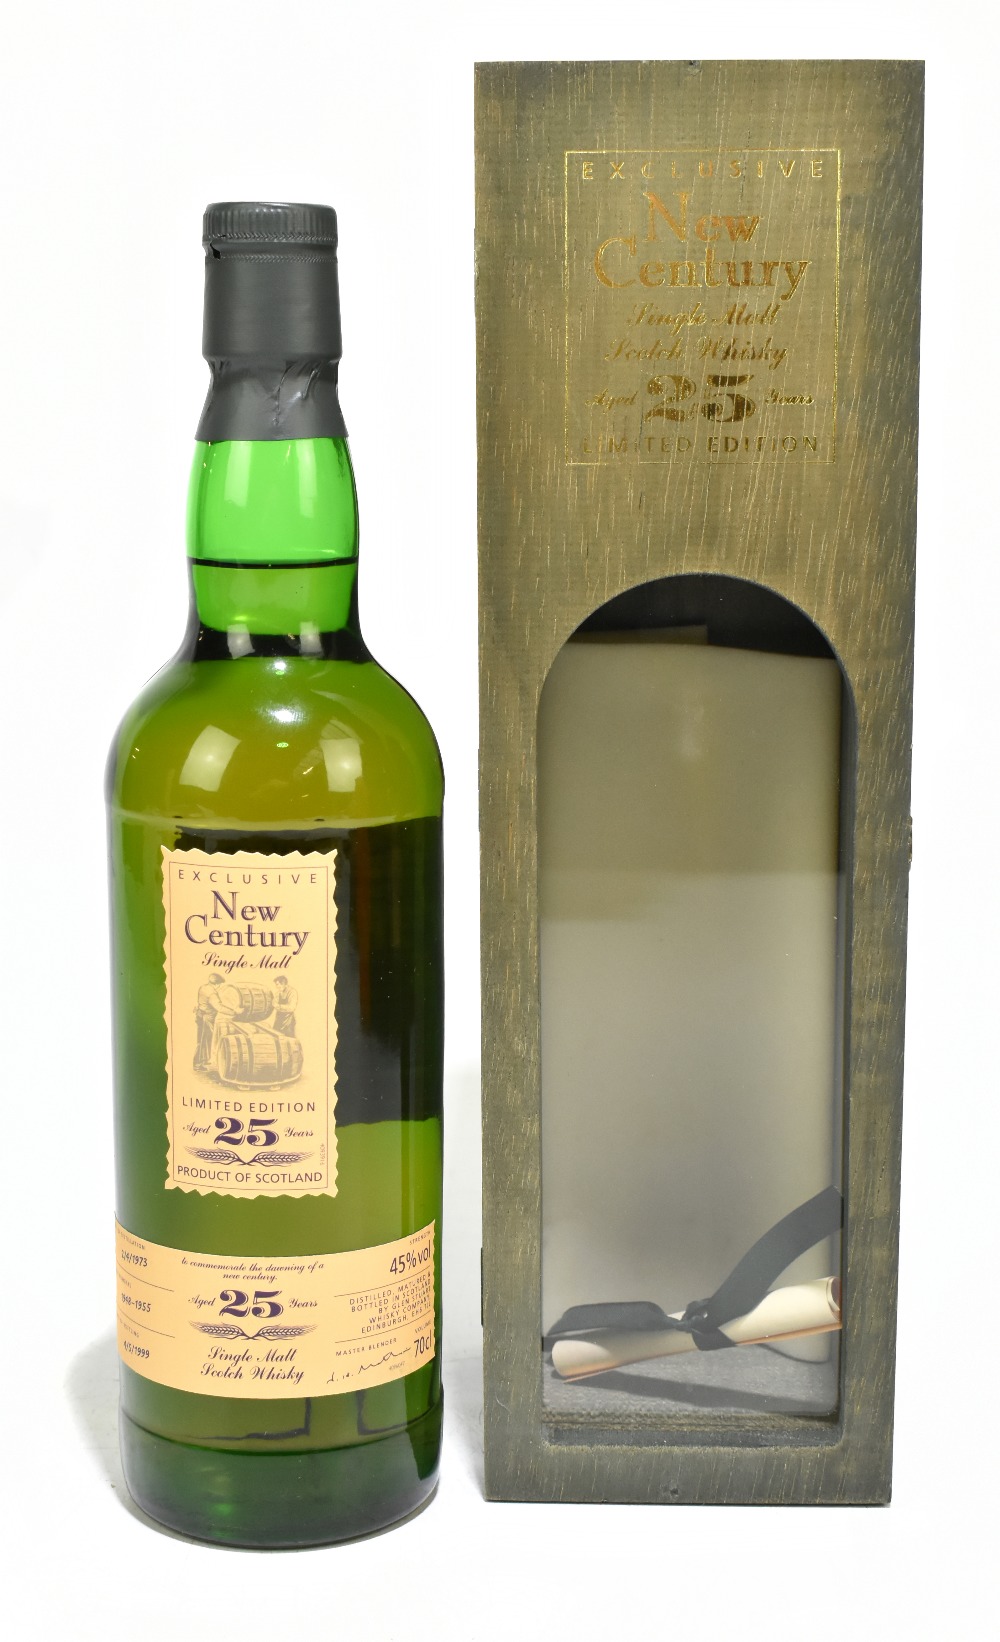 WHISKY; a single bottle of New Century Exclusive Limited Edition Tamnavulin Glen Stuart 1973 Aged 25